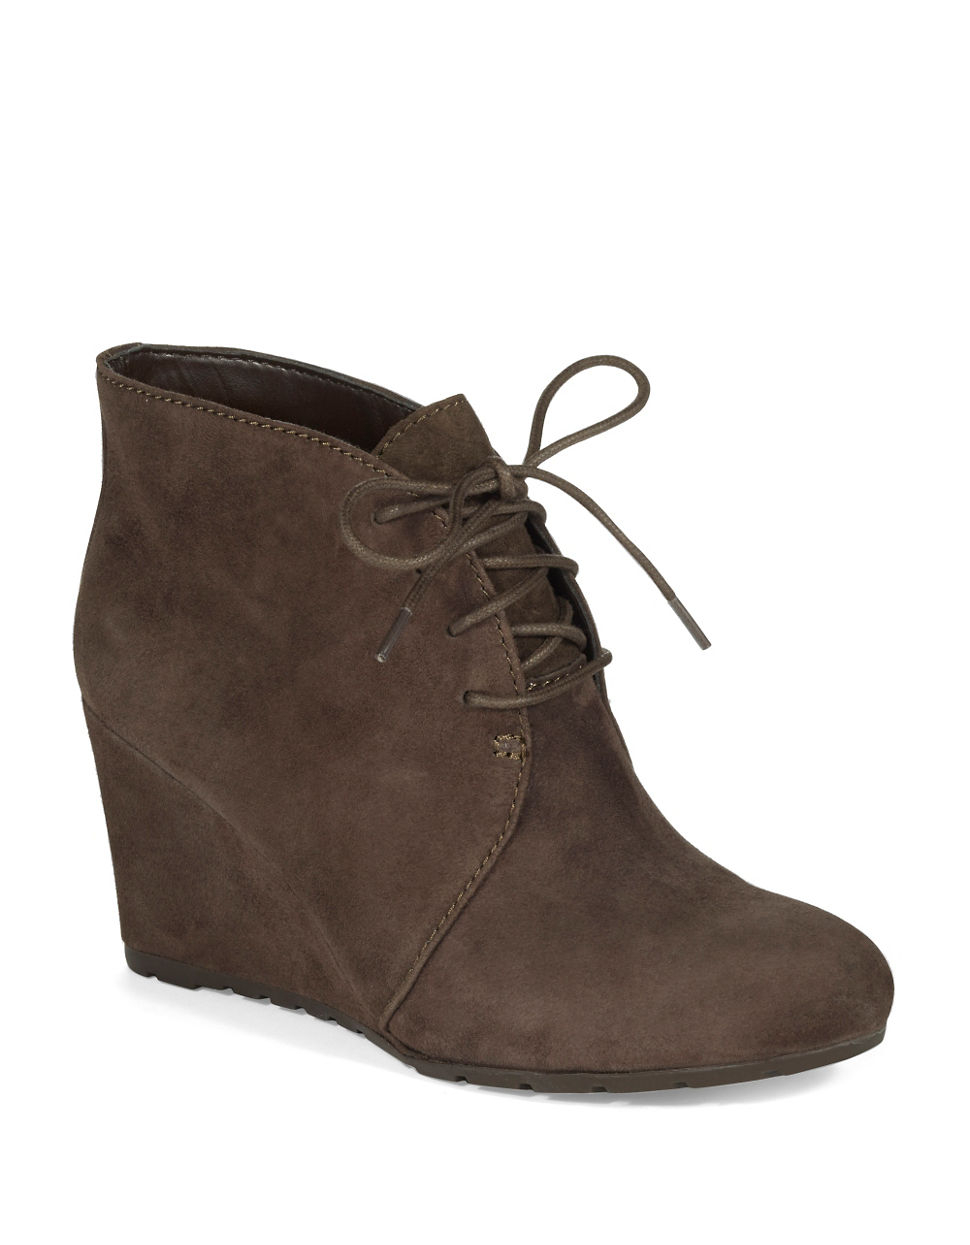 Clarks Rosepoint Dew Suede Wedge Ankle Boots in Brown | Lyst